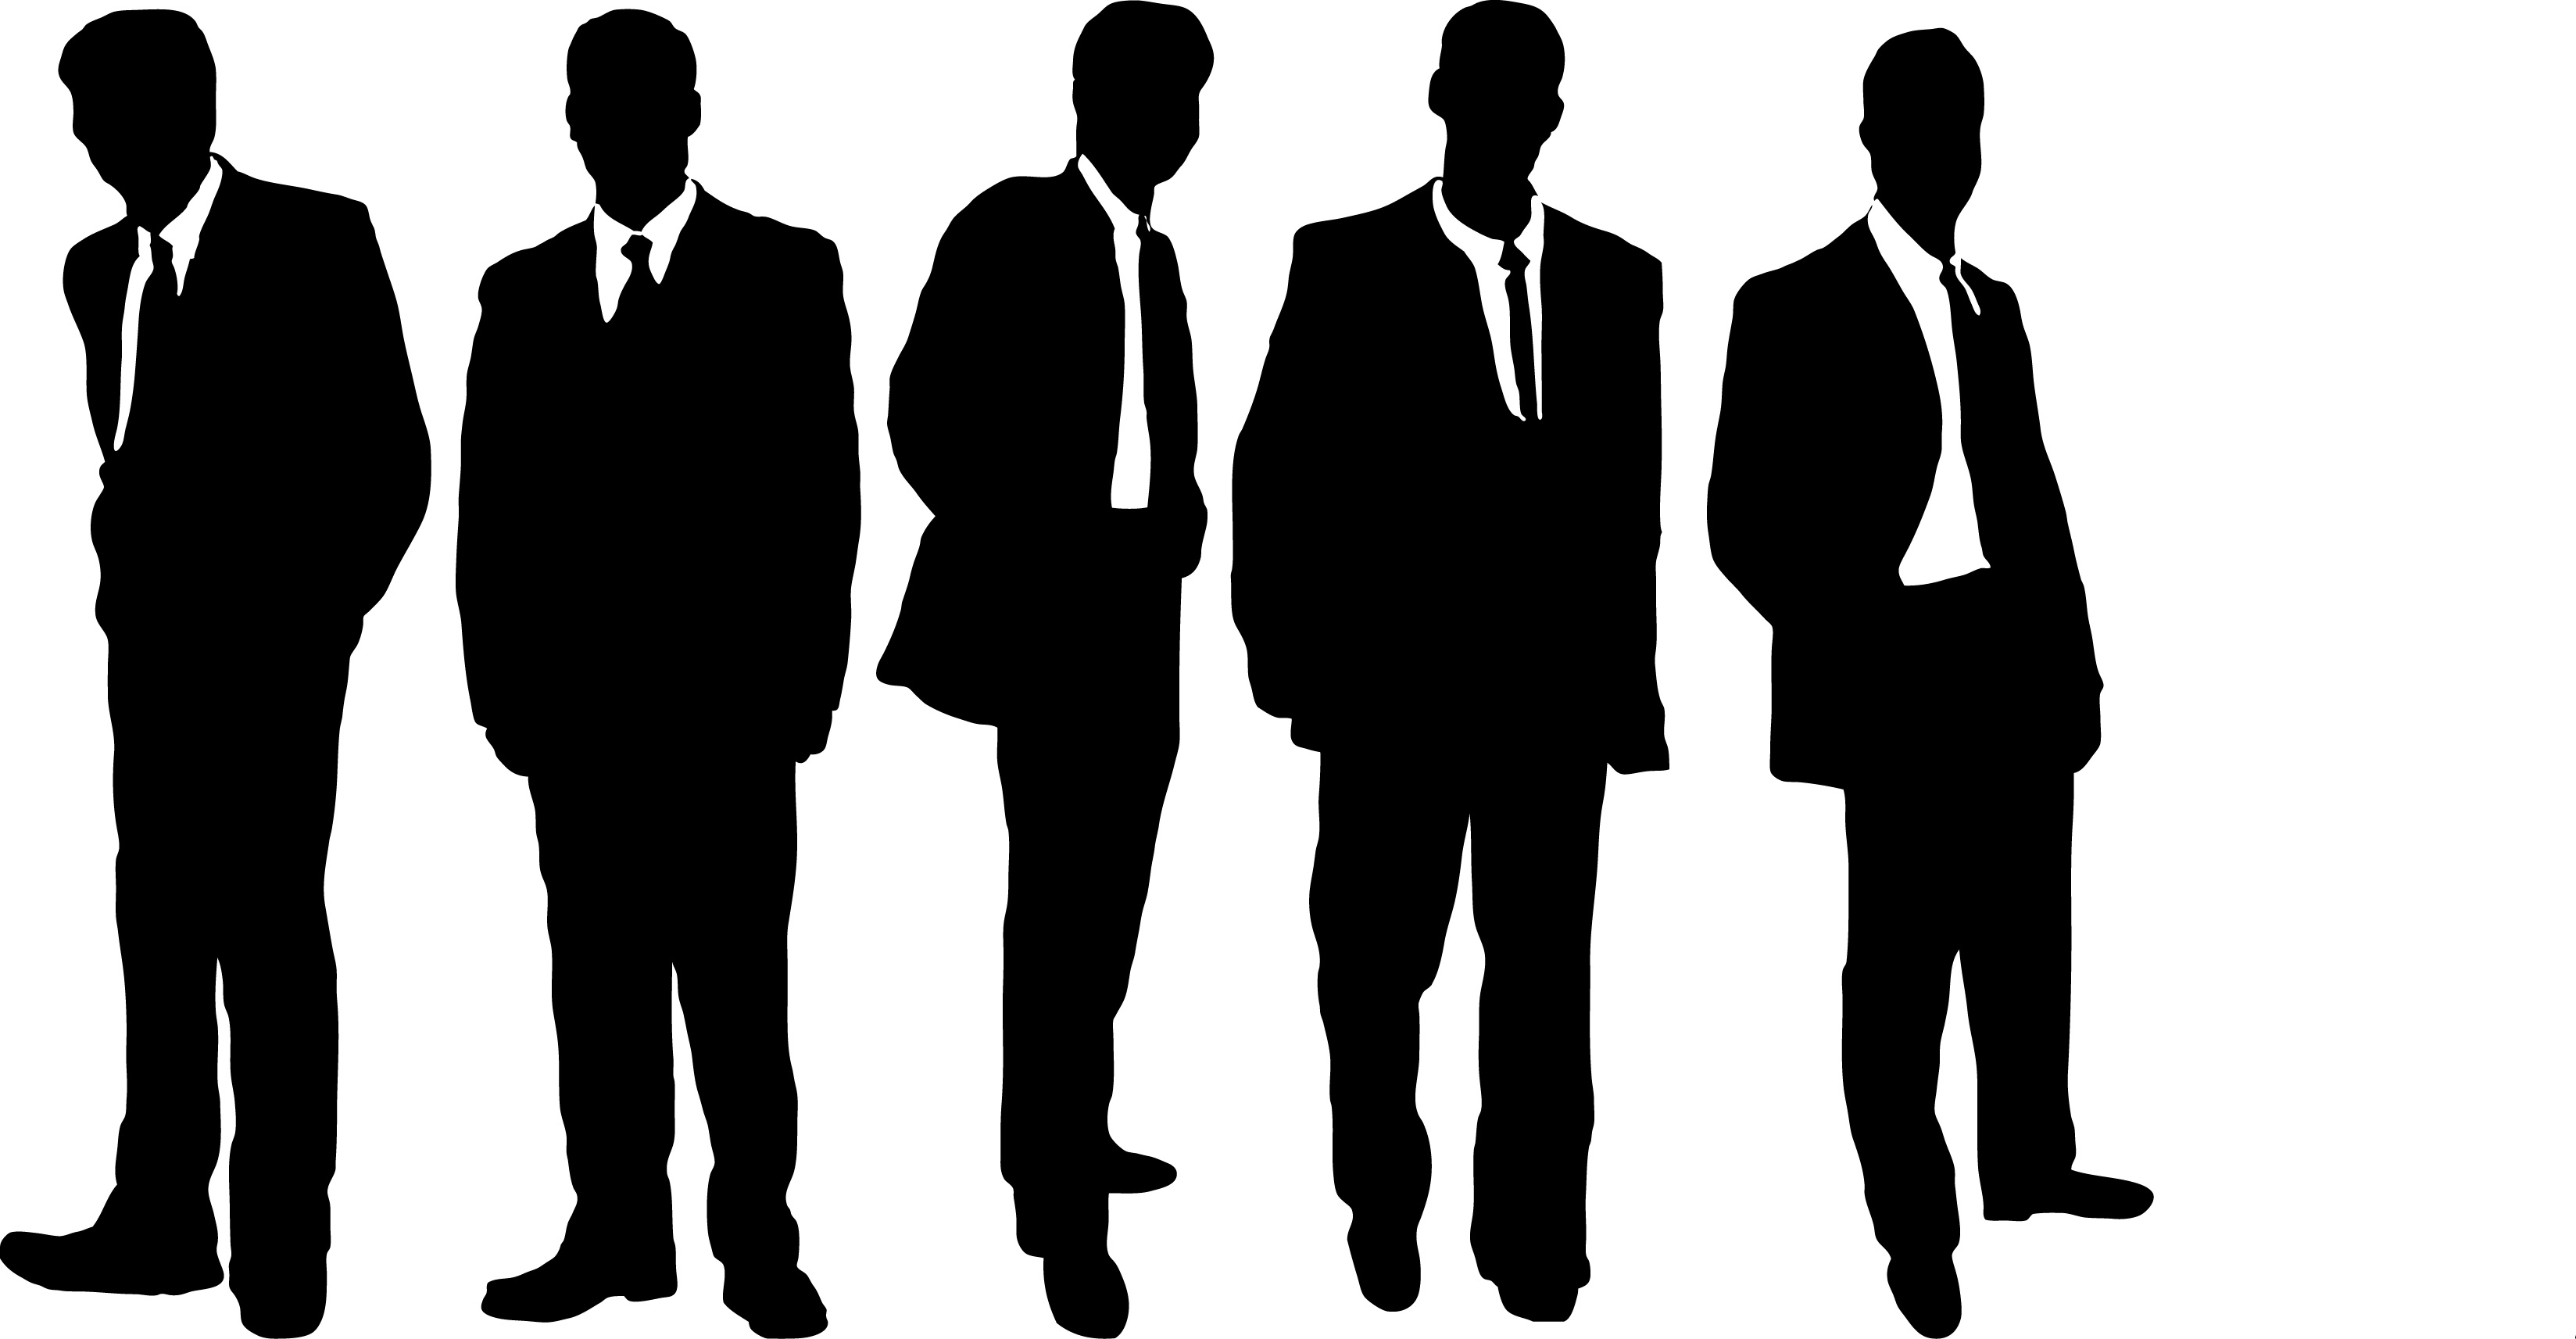 People clipart silhouette no background - ClipartFox